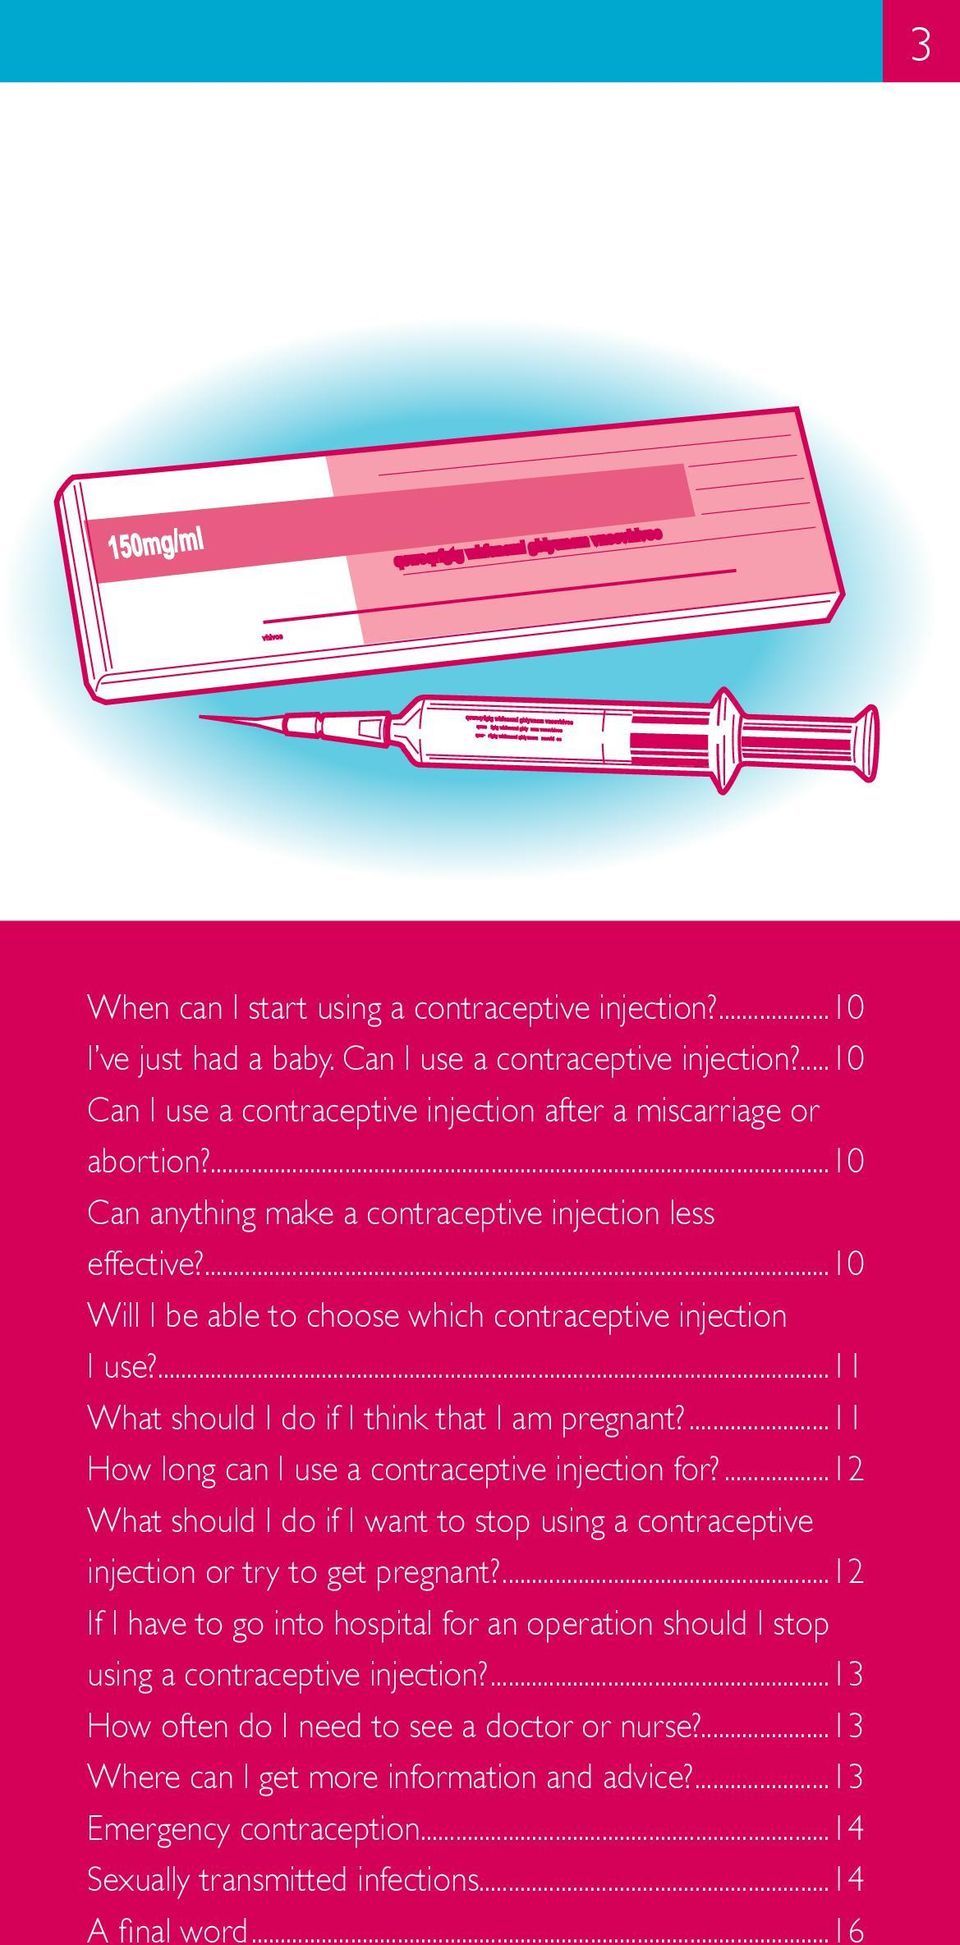 ...11 How long can I use a contraceptive injection for?...12 What should I do if I want to stop using a contraceptive injection or try to get pregnant?